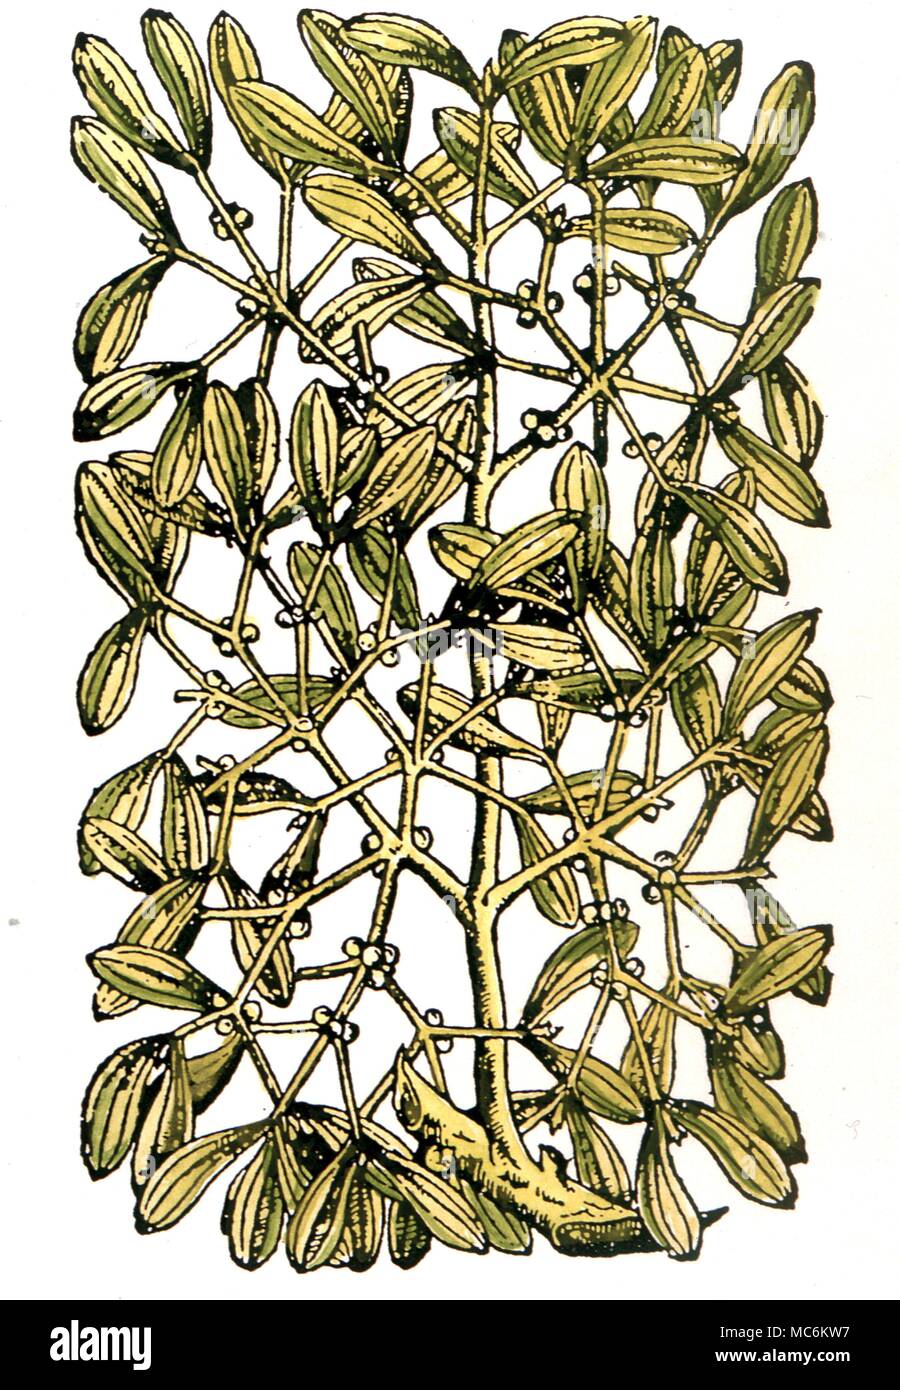 Herbal - Mistletoe After a 17th century woodcut. Stock Photo